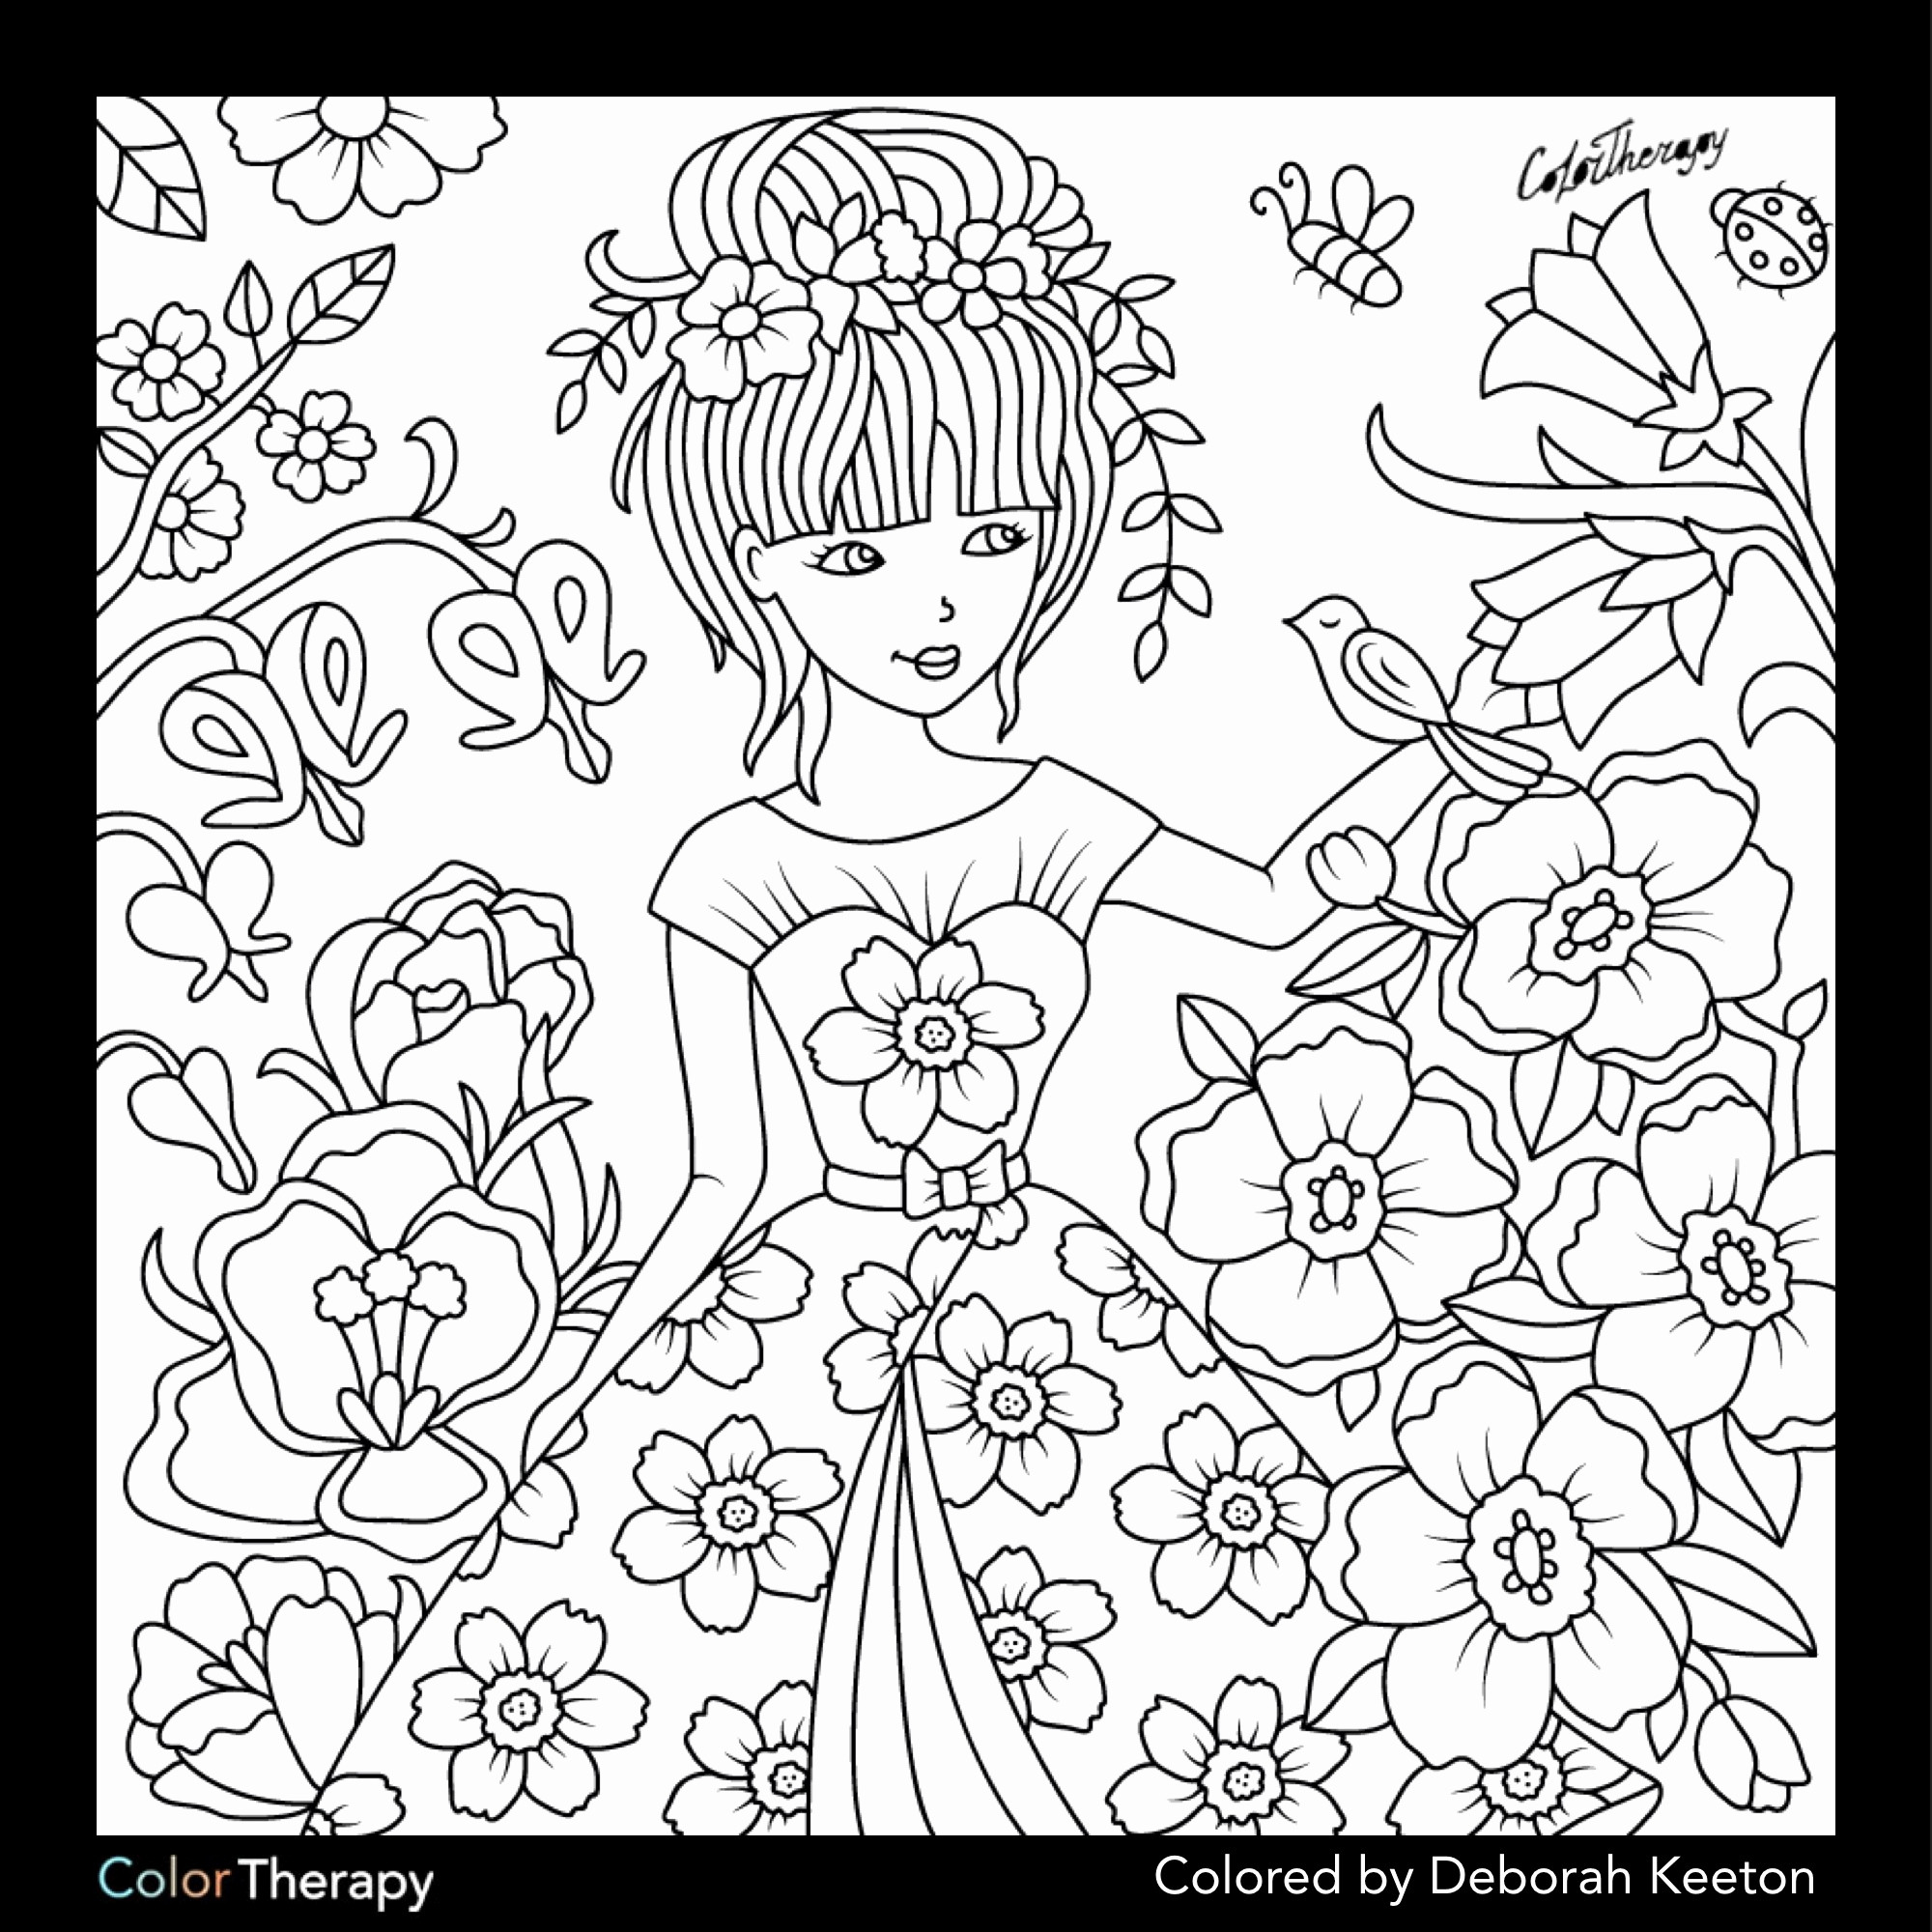 How To Make Coloring Book Pages In Photoshop
 How to Make Coloring Book Pages In shop